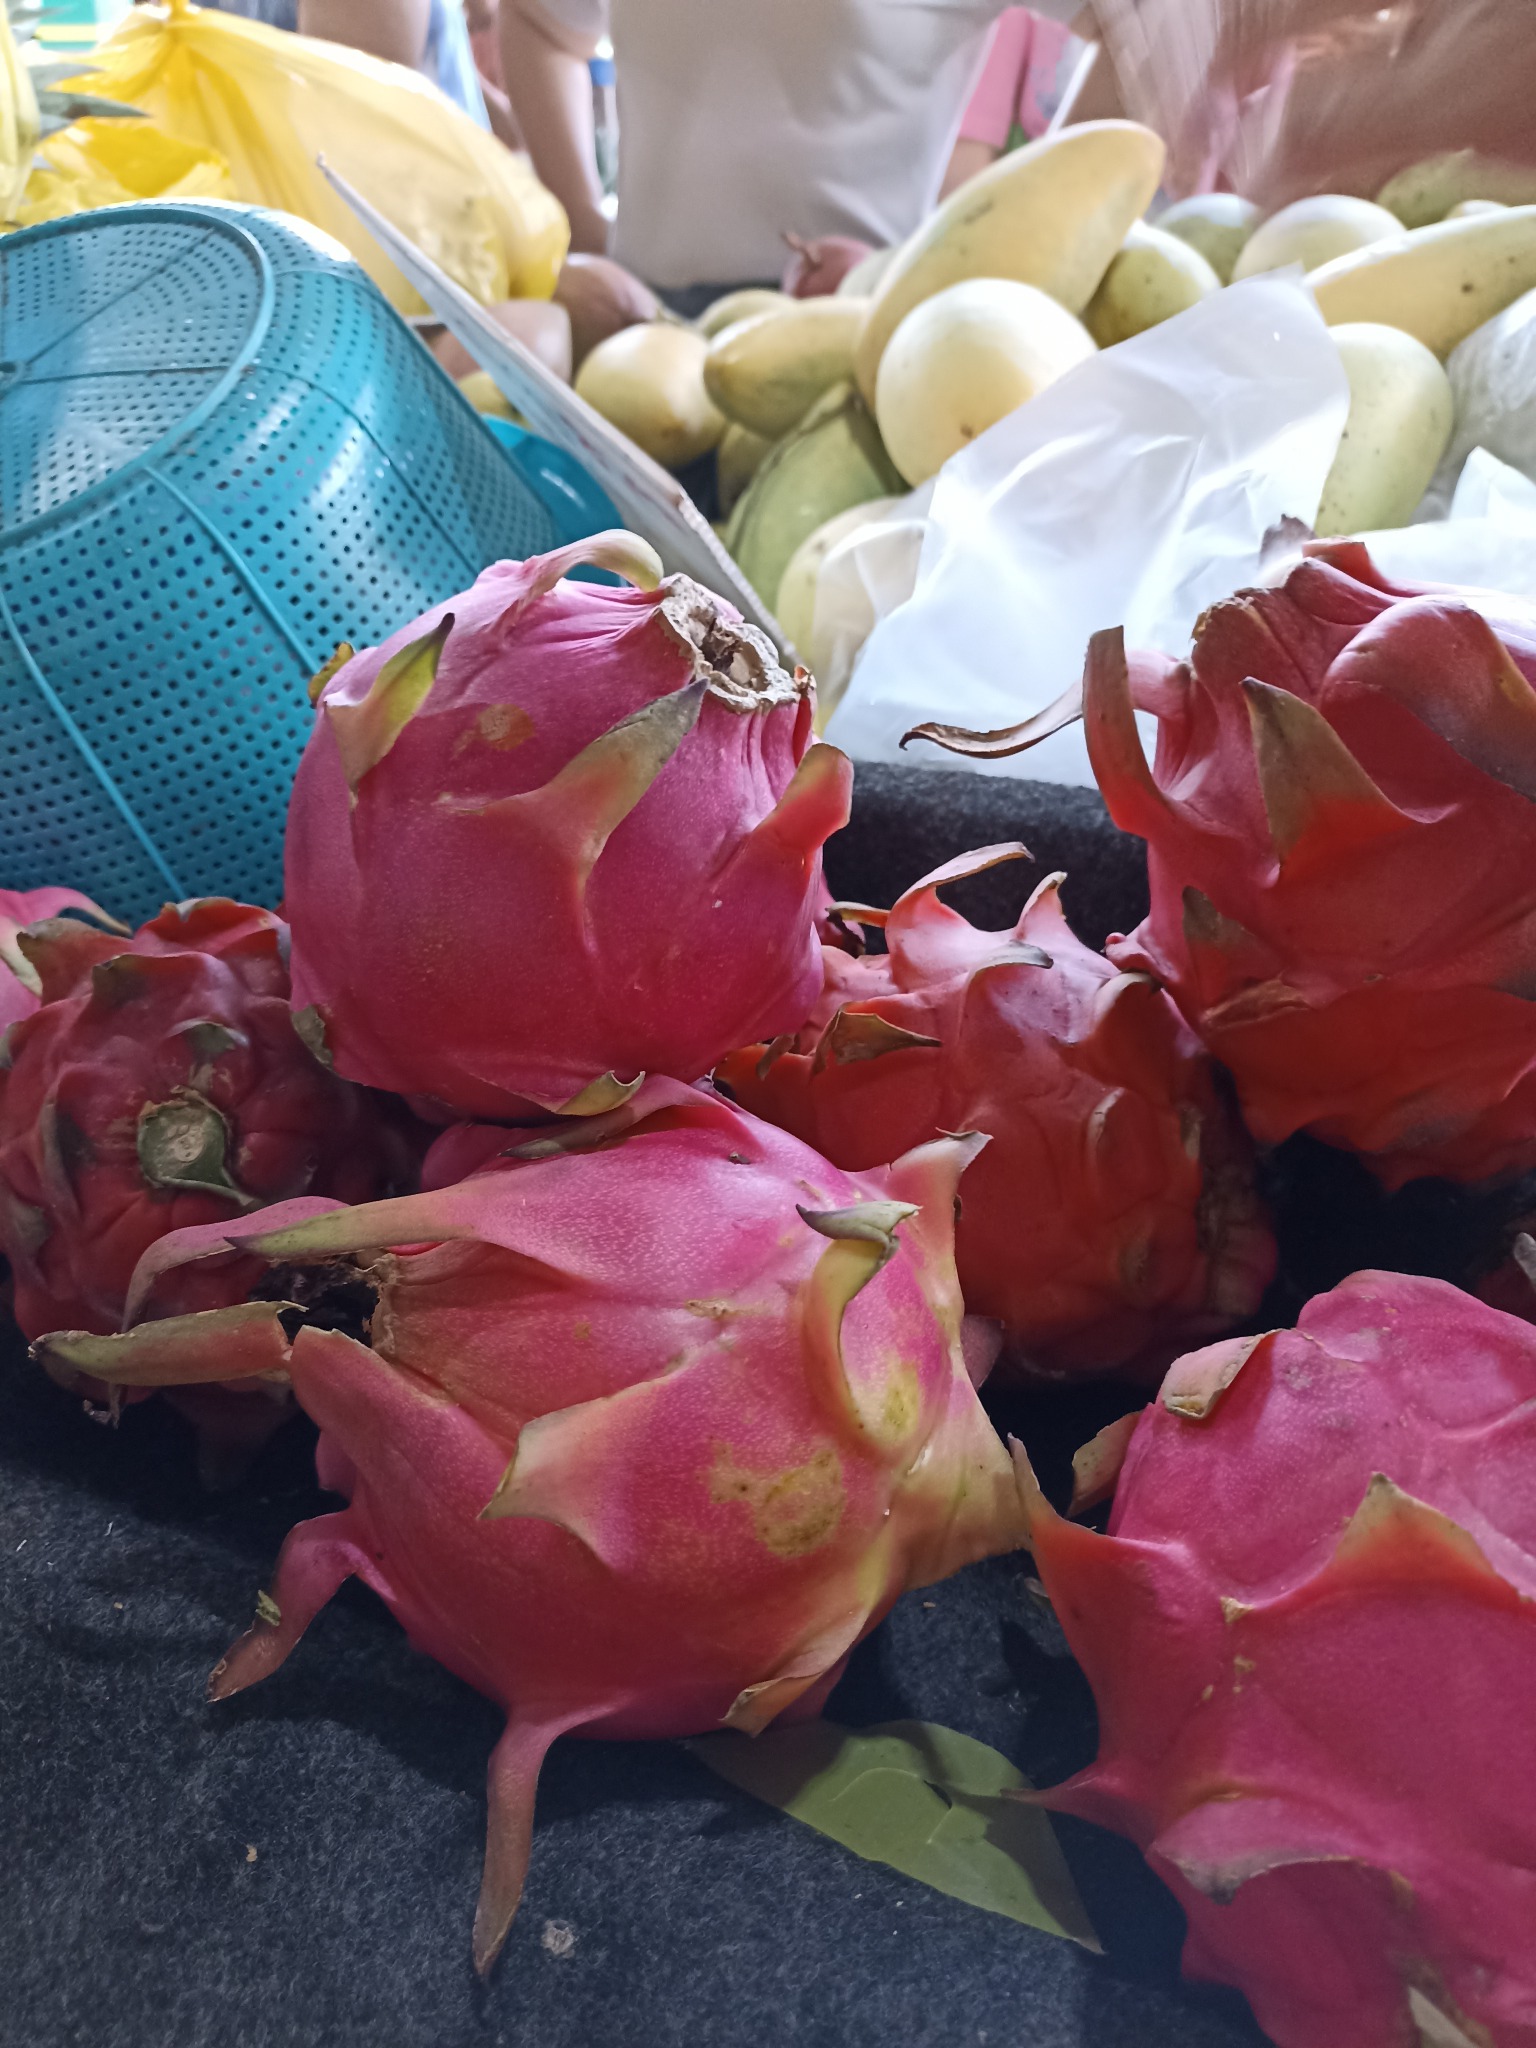 Red Pitaya Dragon Fruit Information and Facts